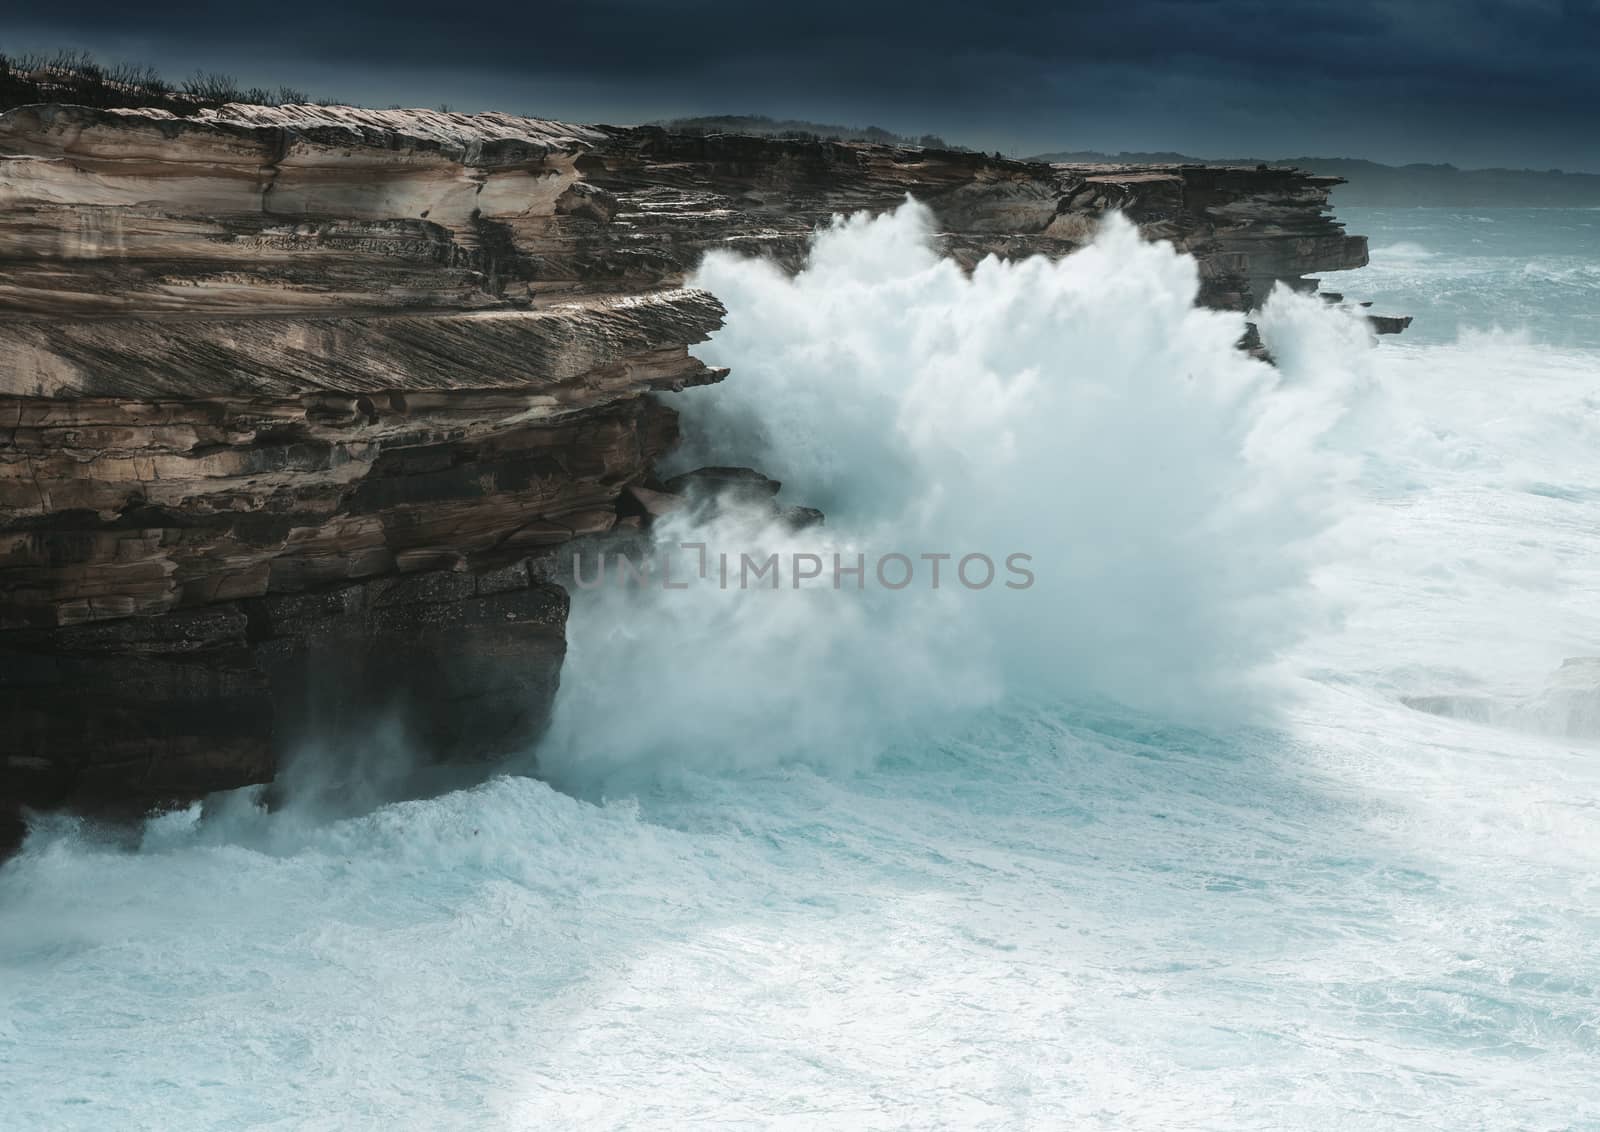 Large waves smash against the cliff coast of Sydney creating large sprays of water forced upwards to the tops of these cliffs stand around 30 metres in height